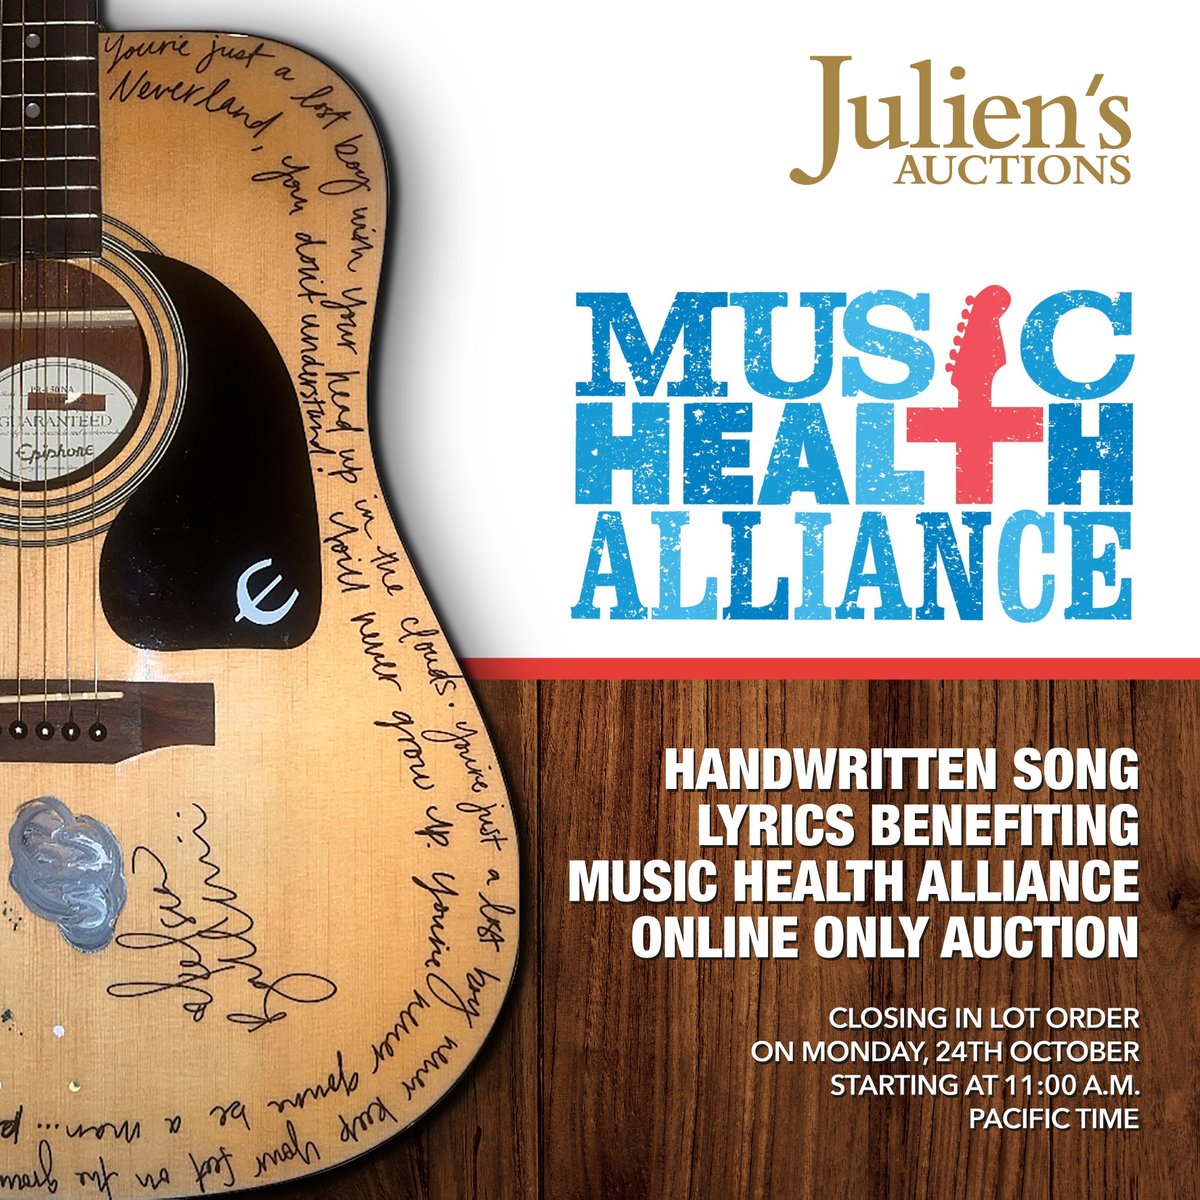 Handwritten lyrics of 'If I Was a Cowboy' are in the ‘Handwritten Song Lyrics Auction’ benefiting @musichealthall! 🤠 The auction is open for advance-bidding NOW and will be closing in lot order on 10/24 at 1pm CT. Check it out here: bit.ly/MHAJuliensAuct… - Team ML